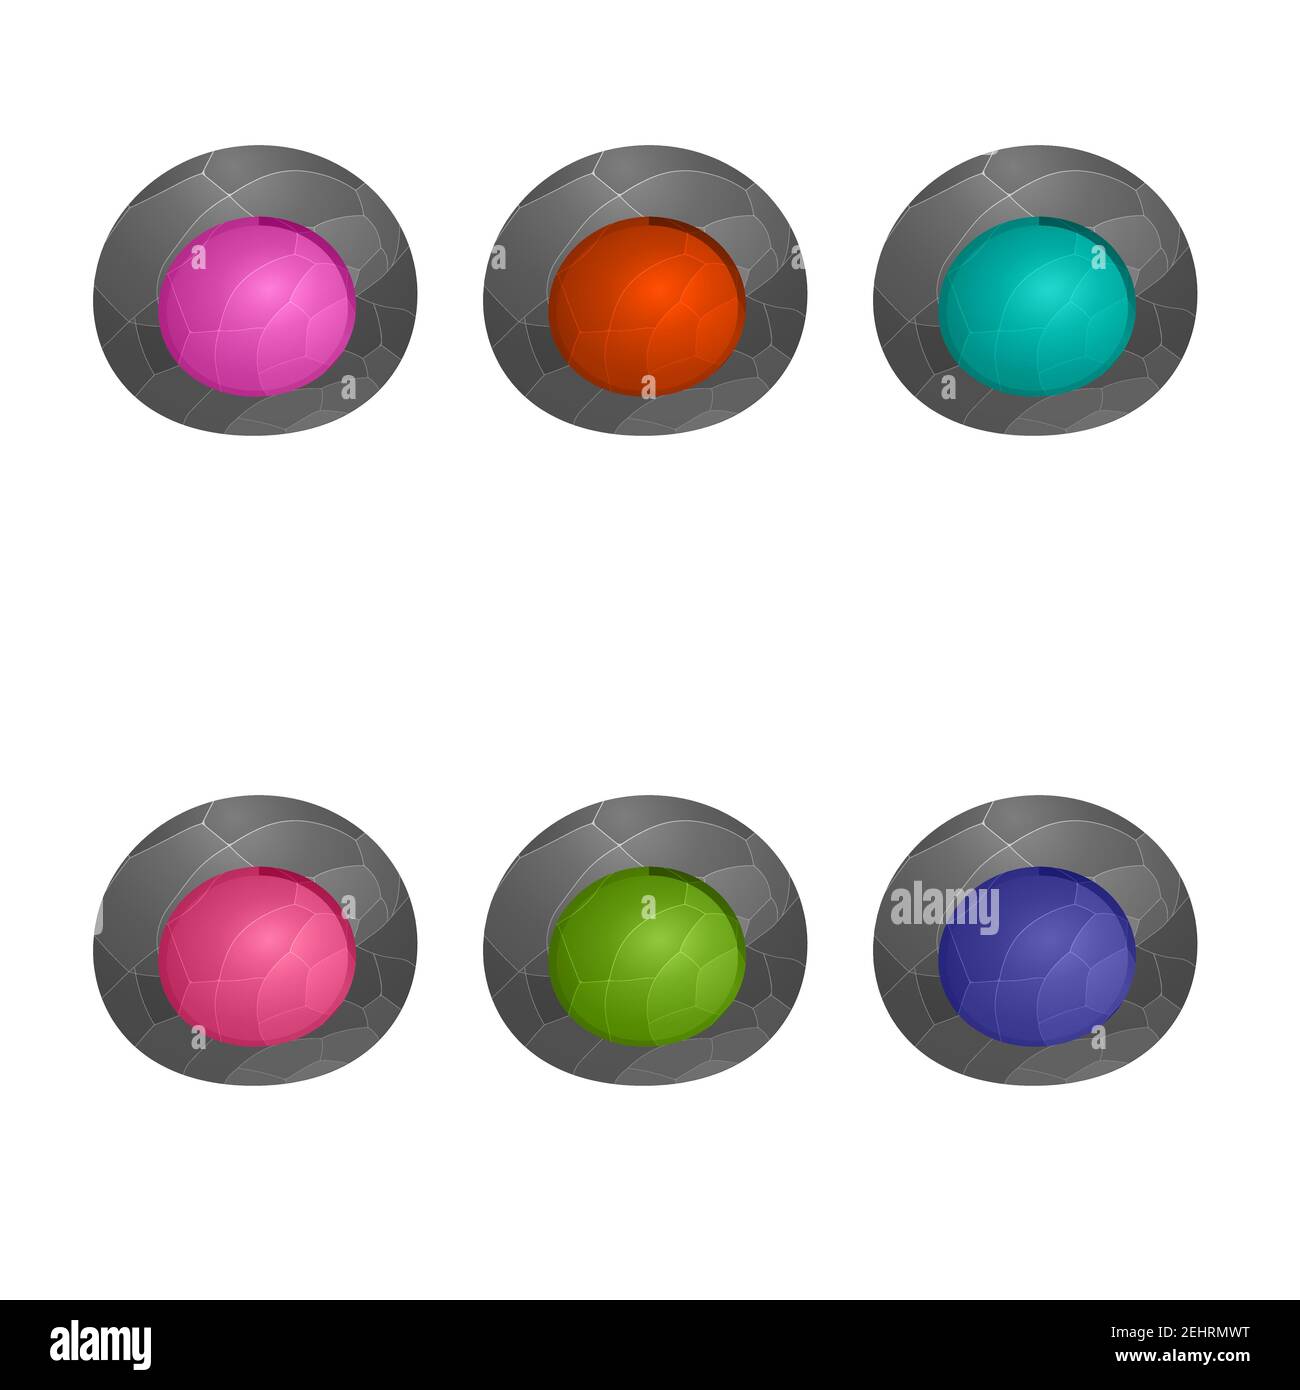 Gaming elements isolated on white background. Design for computer game. Symbols and icons. Collection of round buttons play for games and app Stock Vector